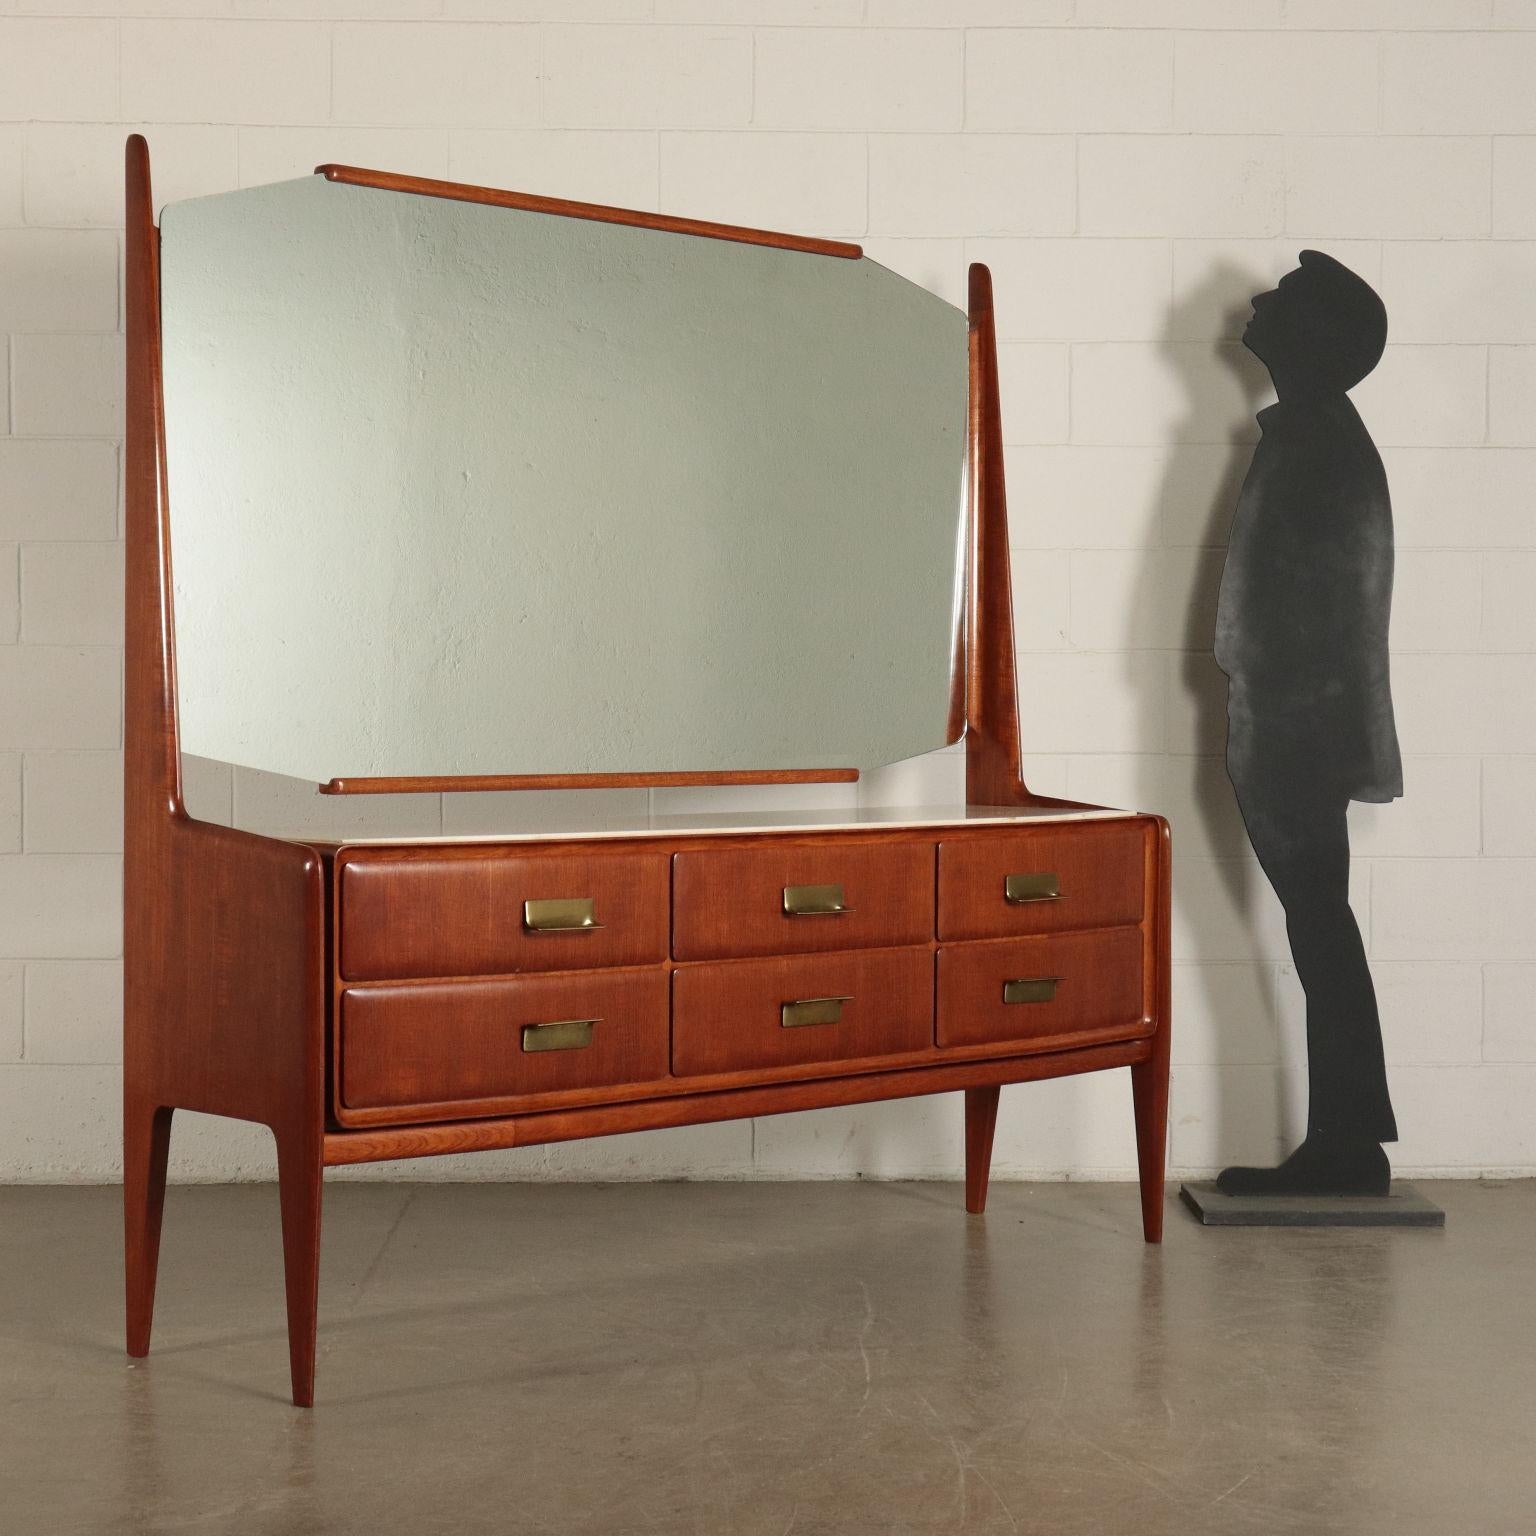 Chest of drawers with mirror; mahogany veneer, top in marble, brass handles.